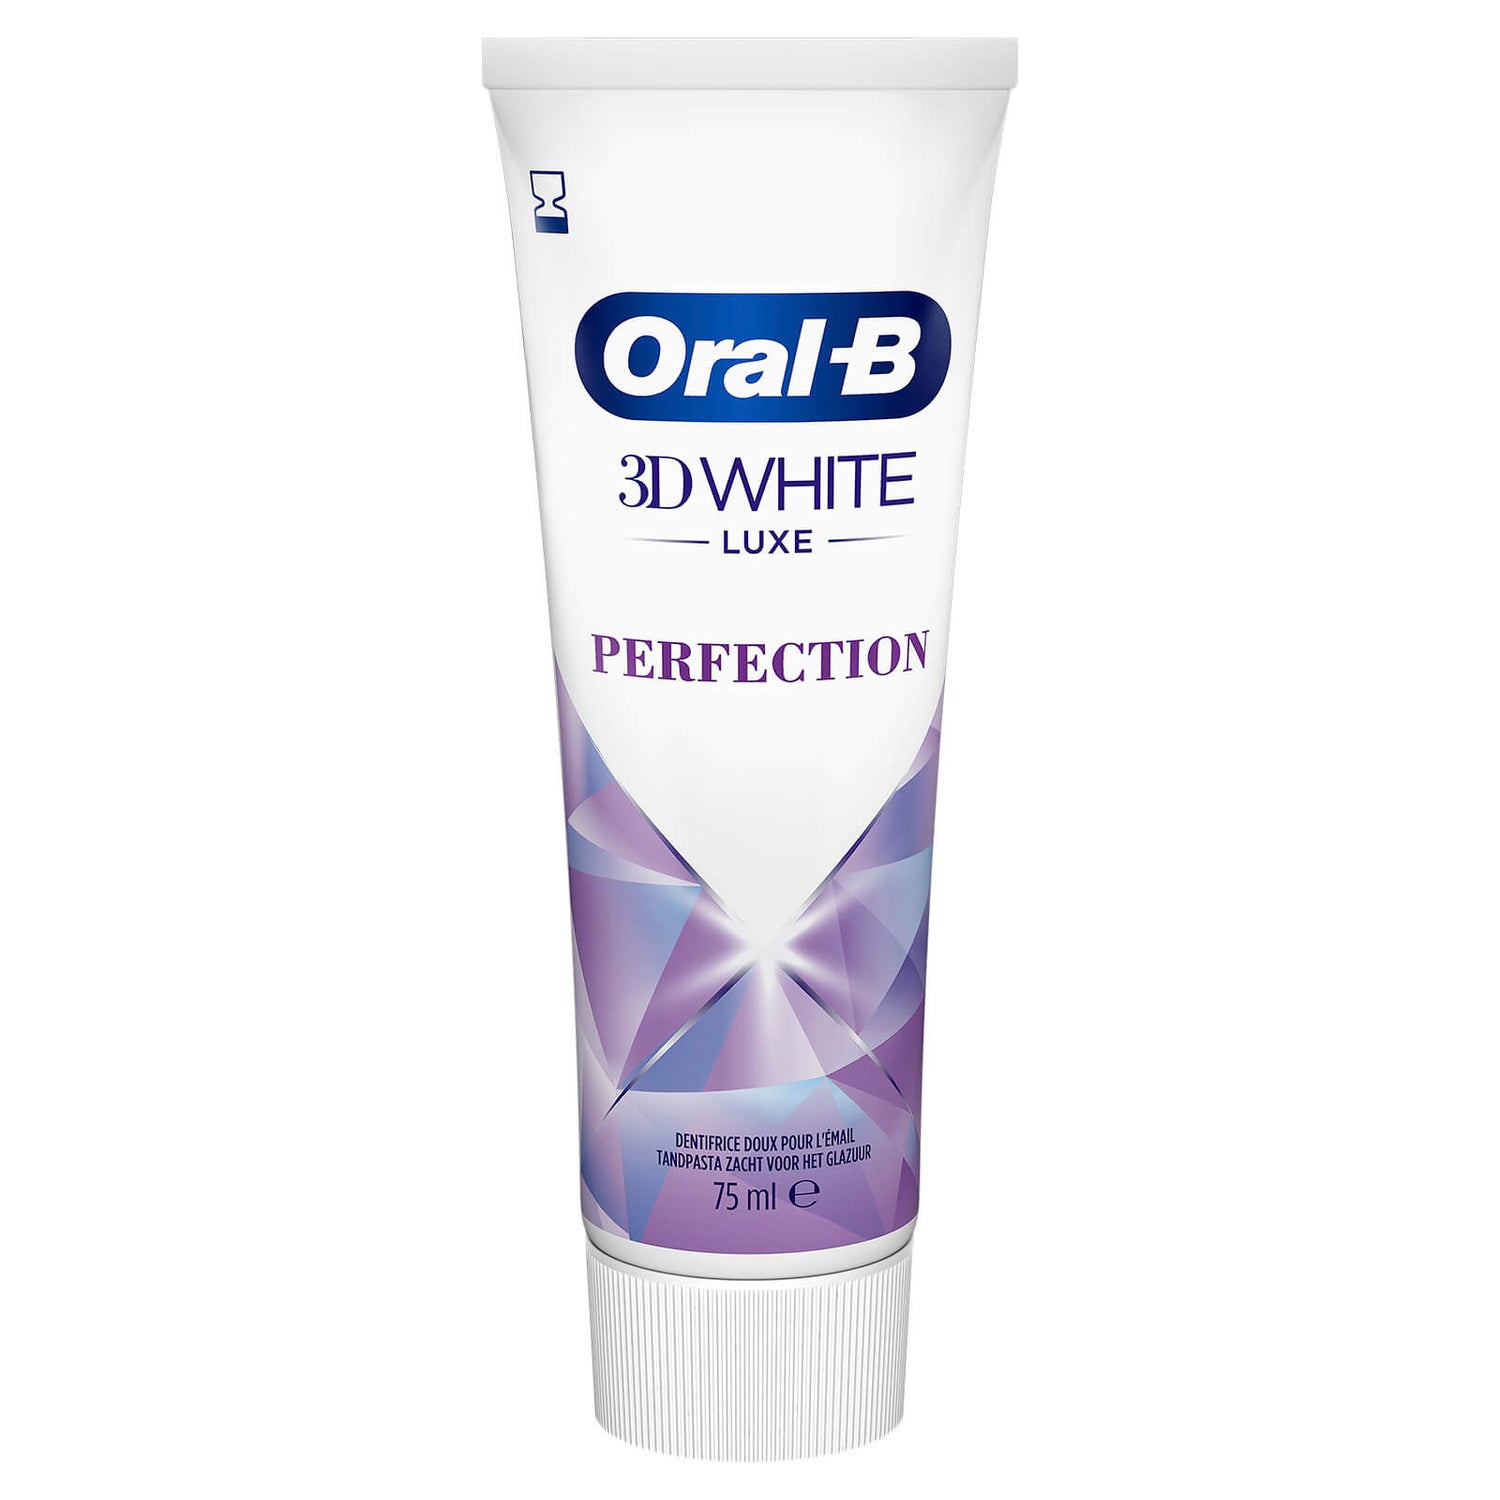 3D White Luxe Perfection 2x75ml